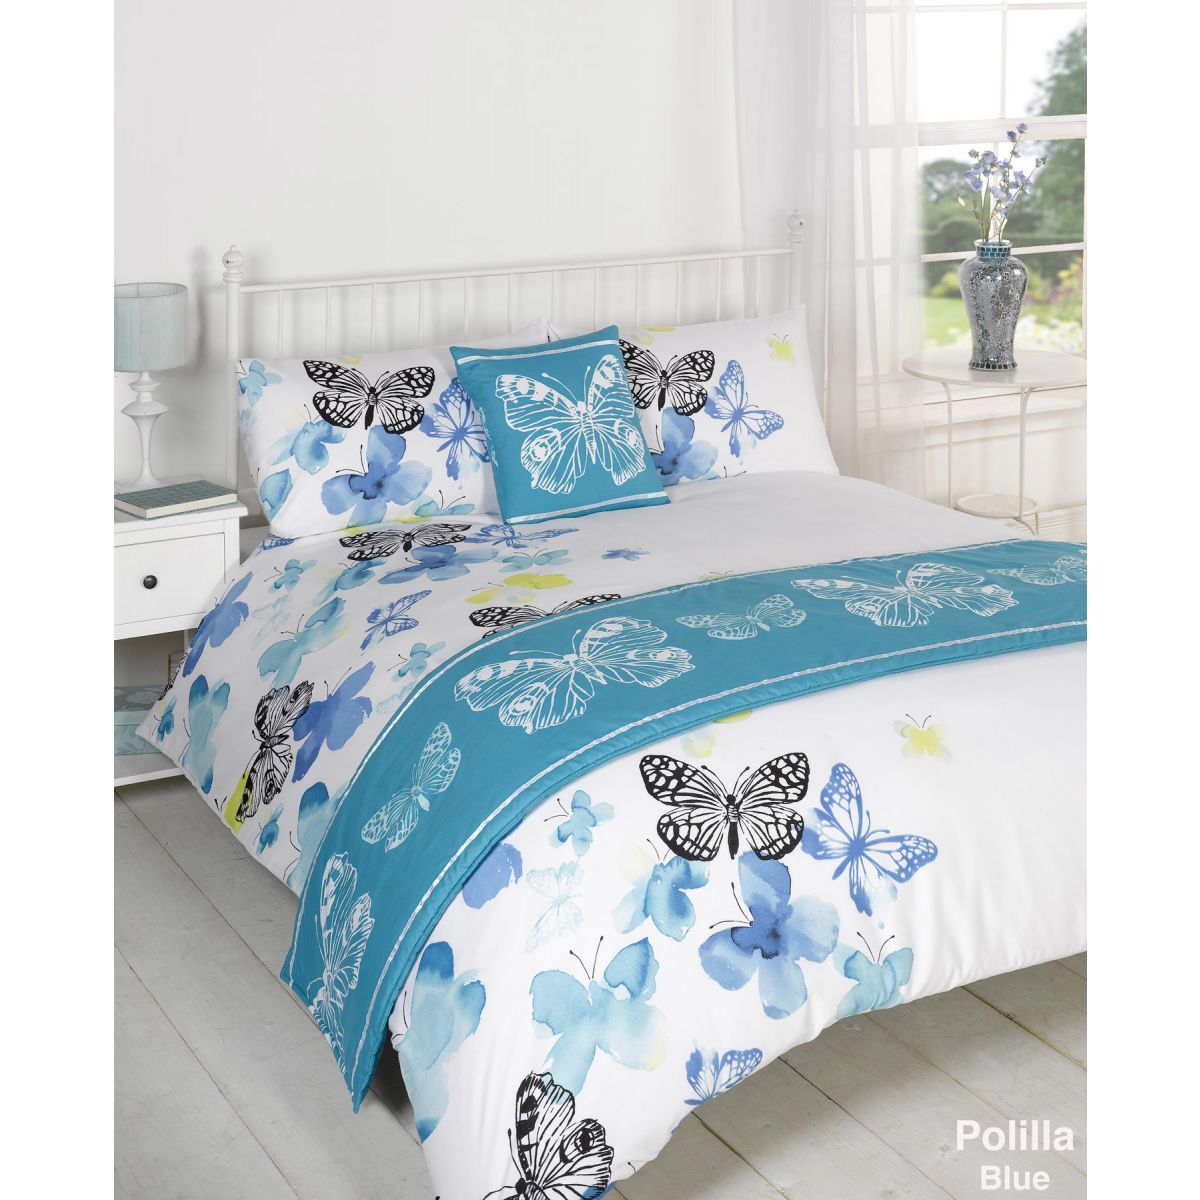 Polilla Bed In A Bag Double Duvet Cover Set - Blue